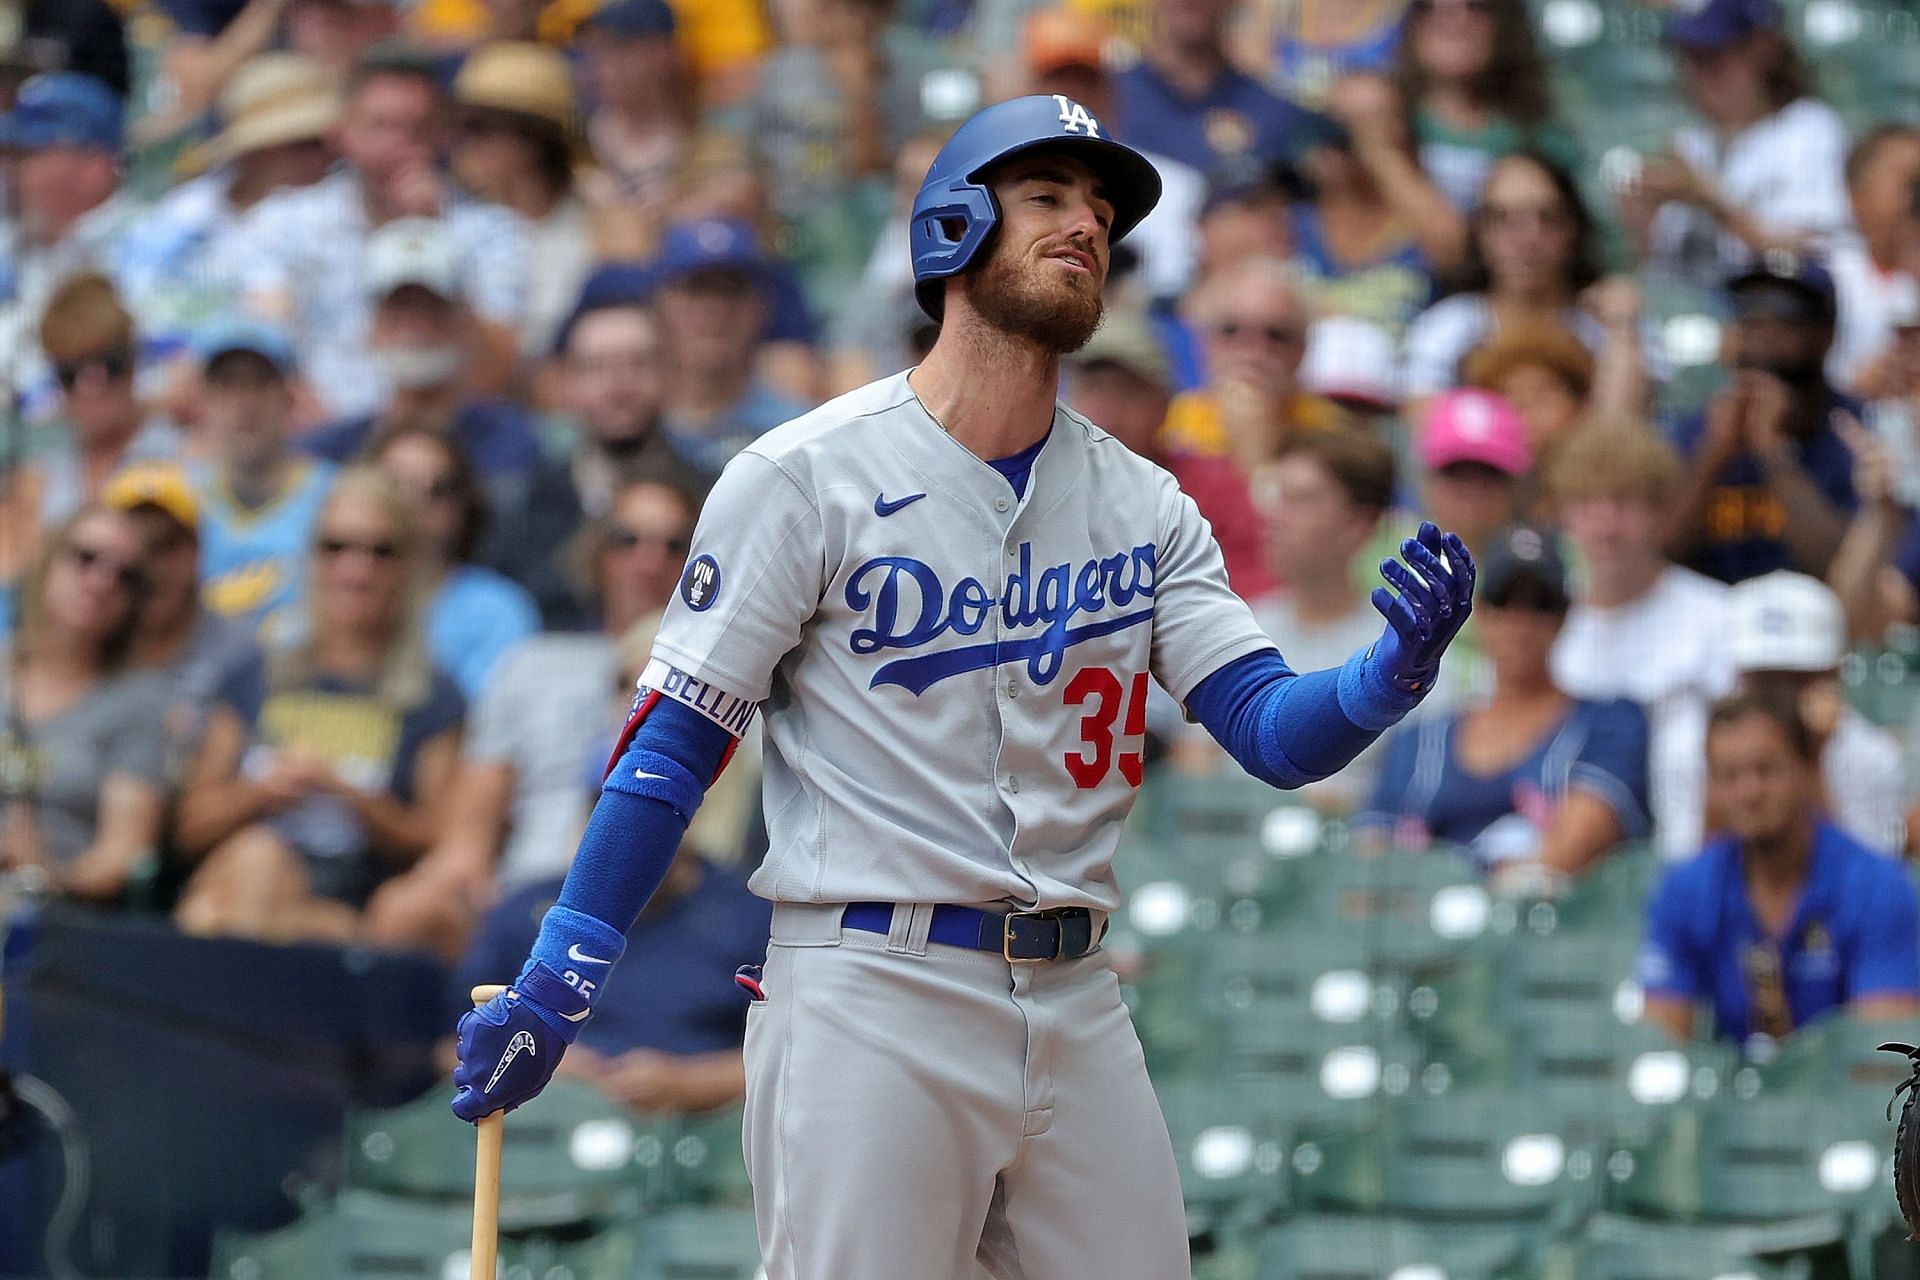 Dodgers: Cody Bellinger Posts a Farewell to LA, Fans on Social Media